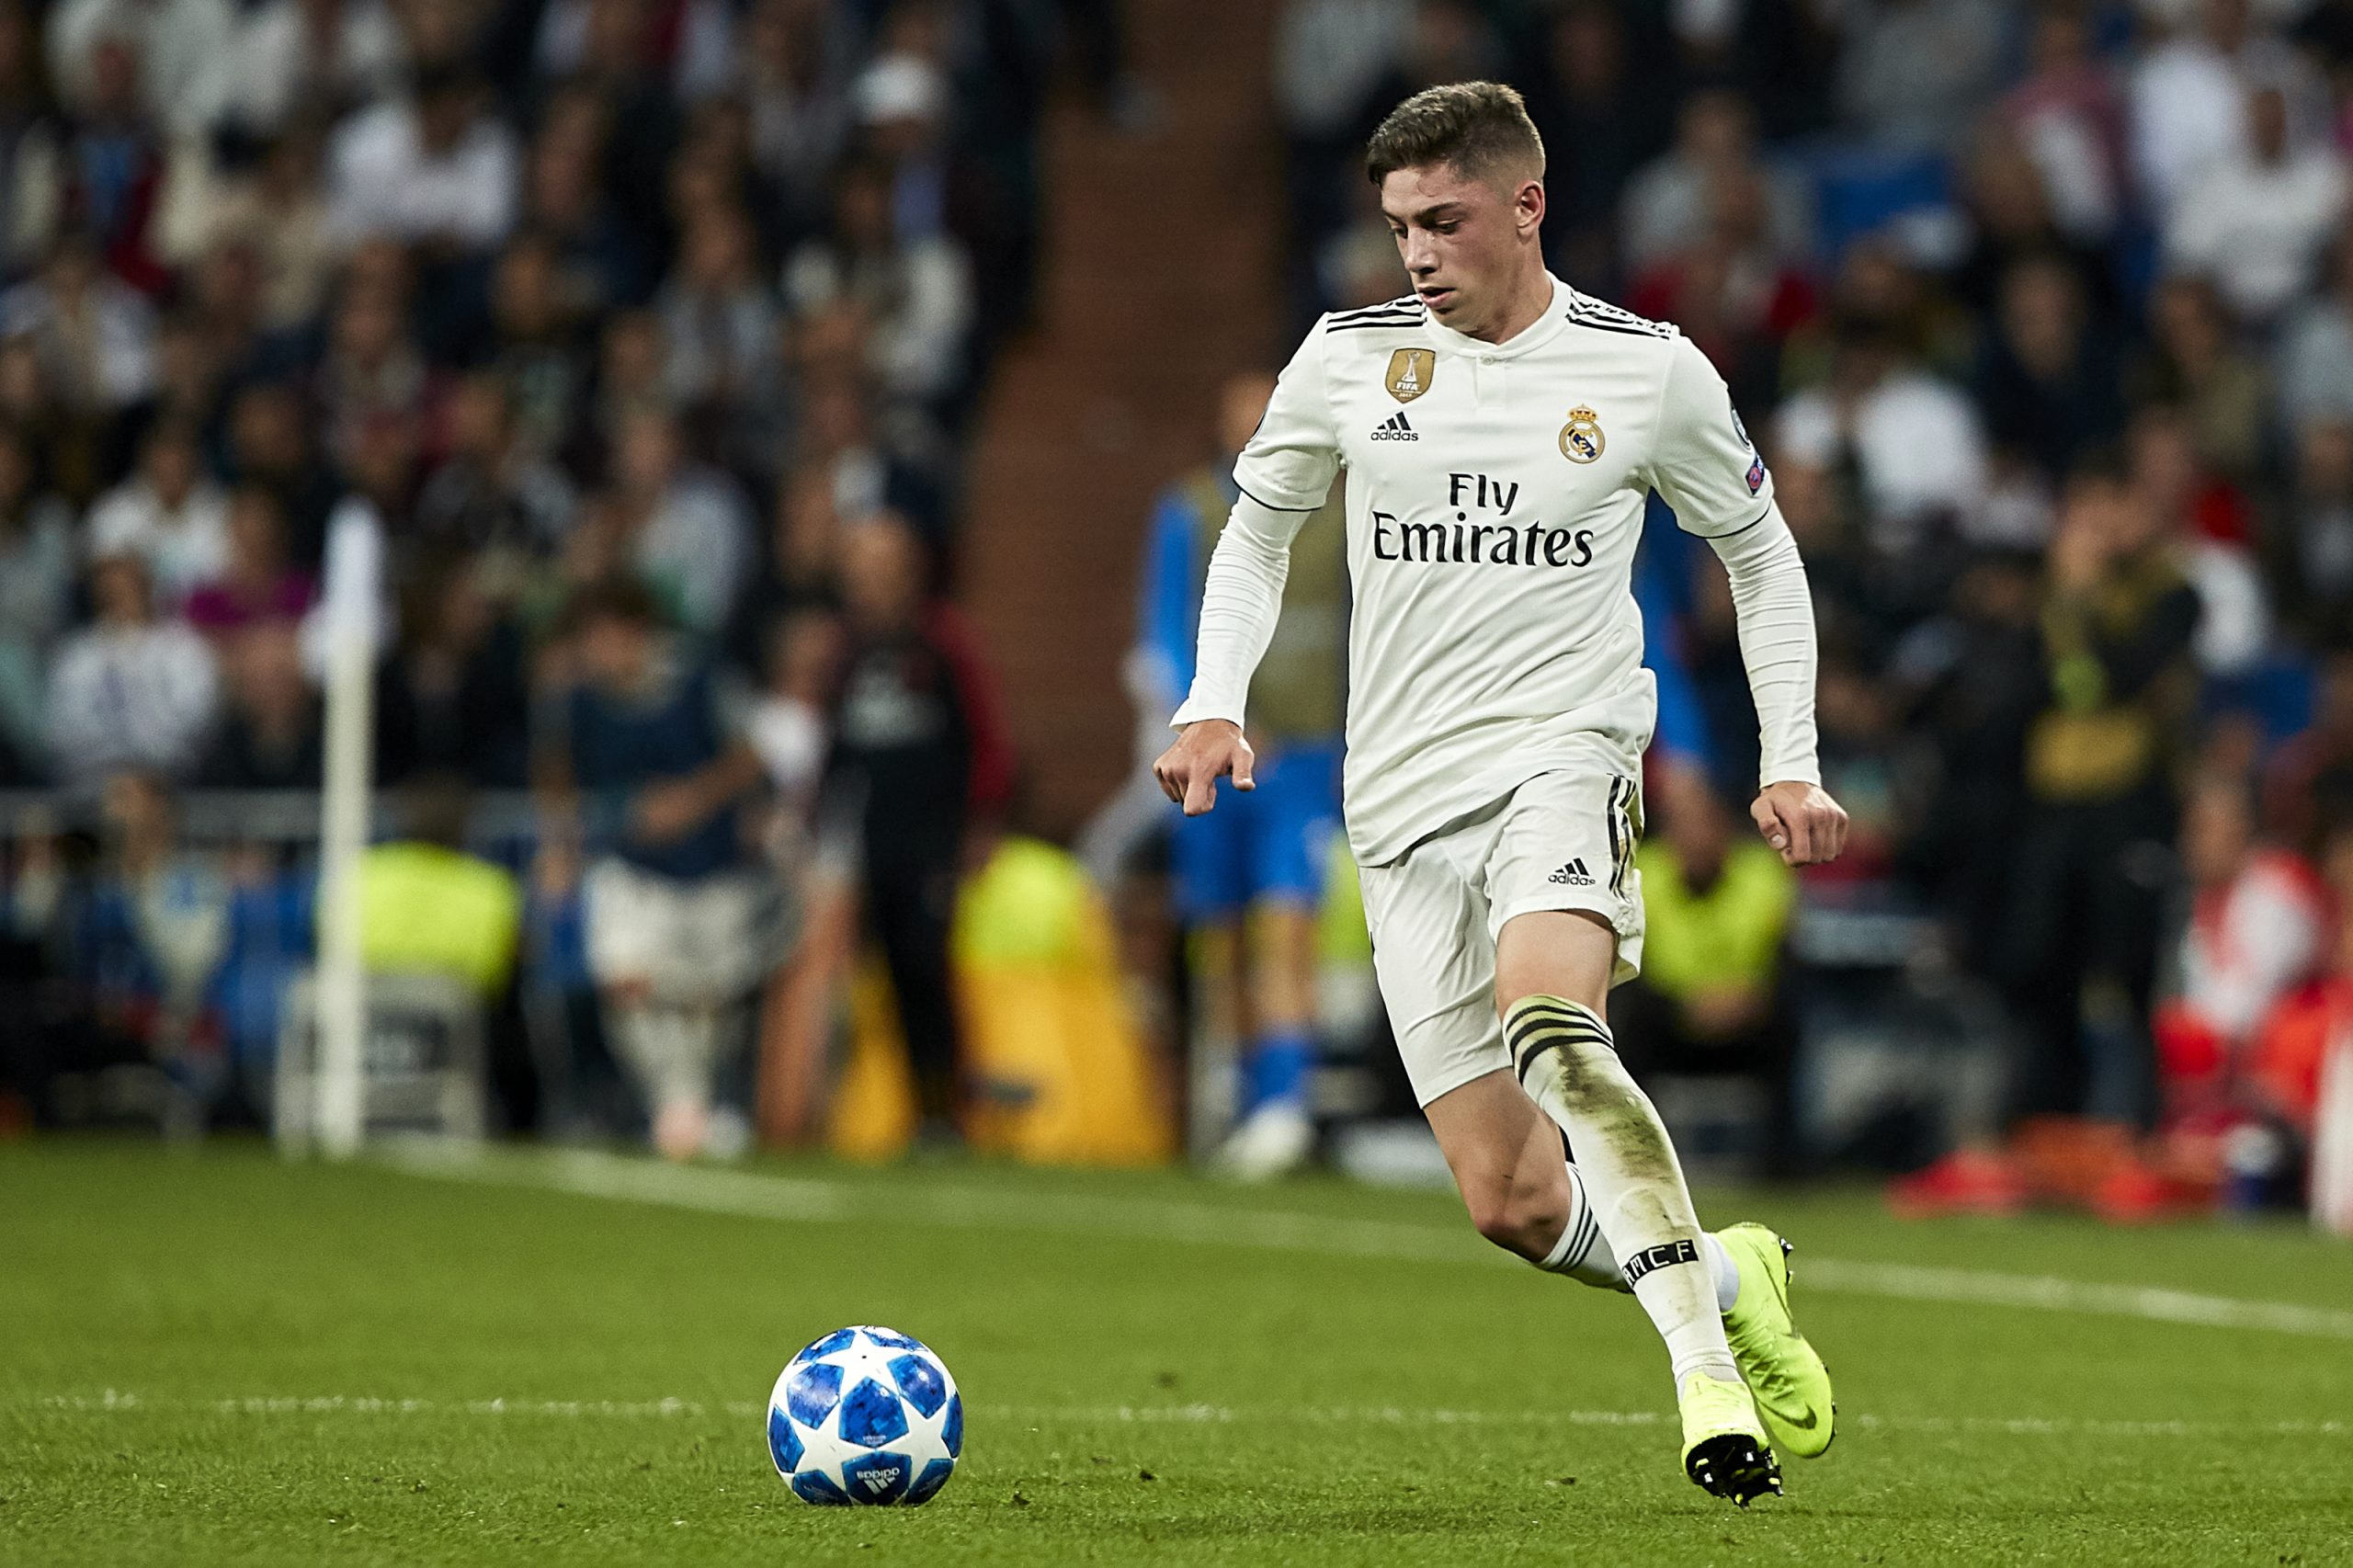 Transfer News: Manchester United ready to pay €70 million for Federico Valverde.